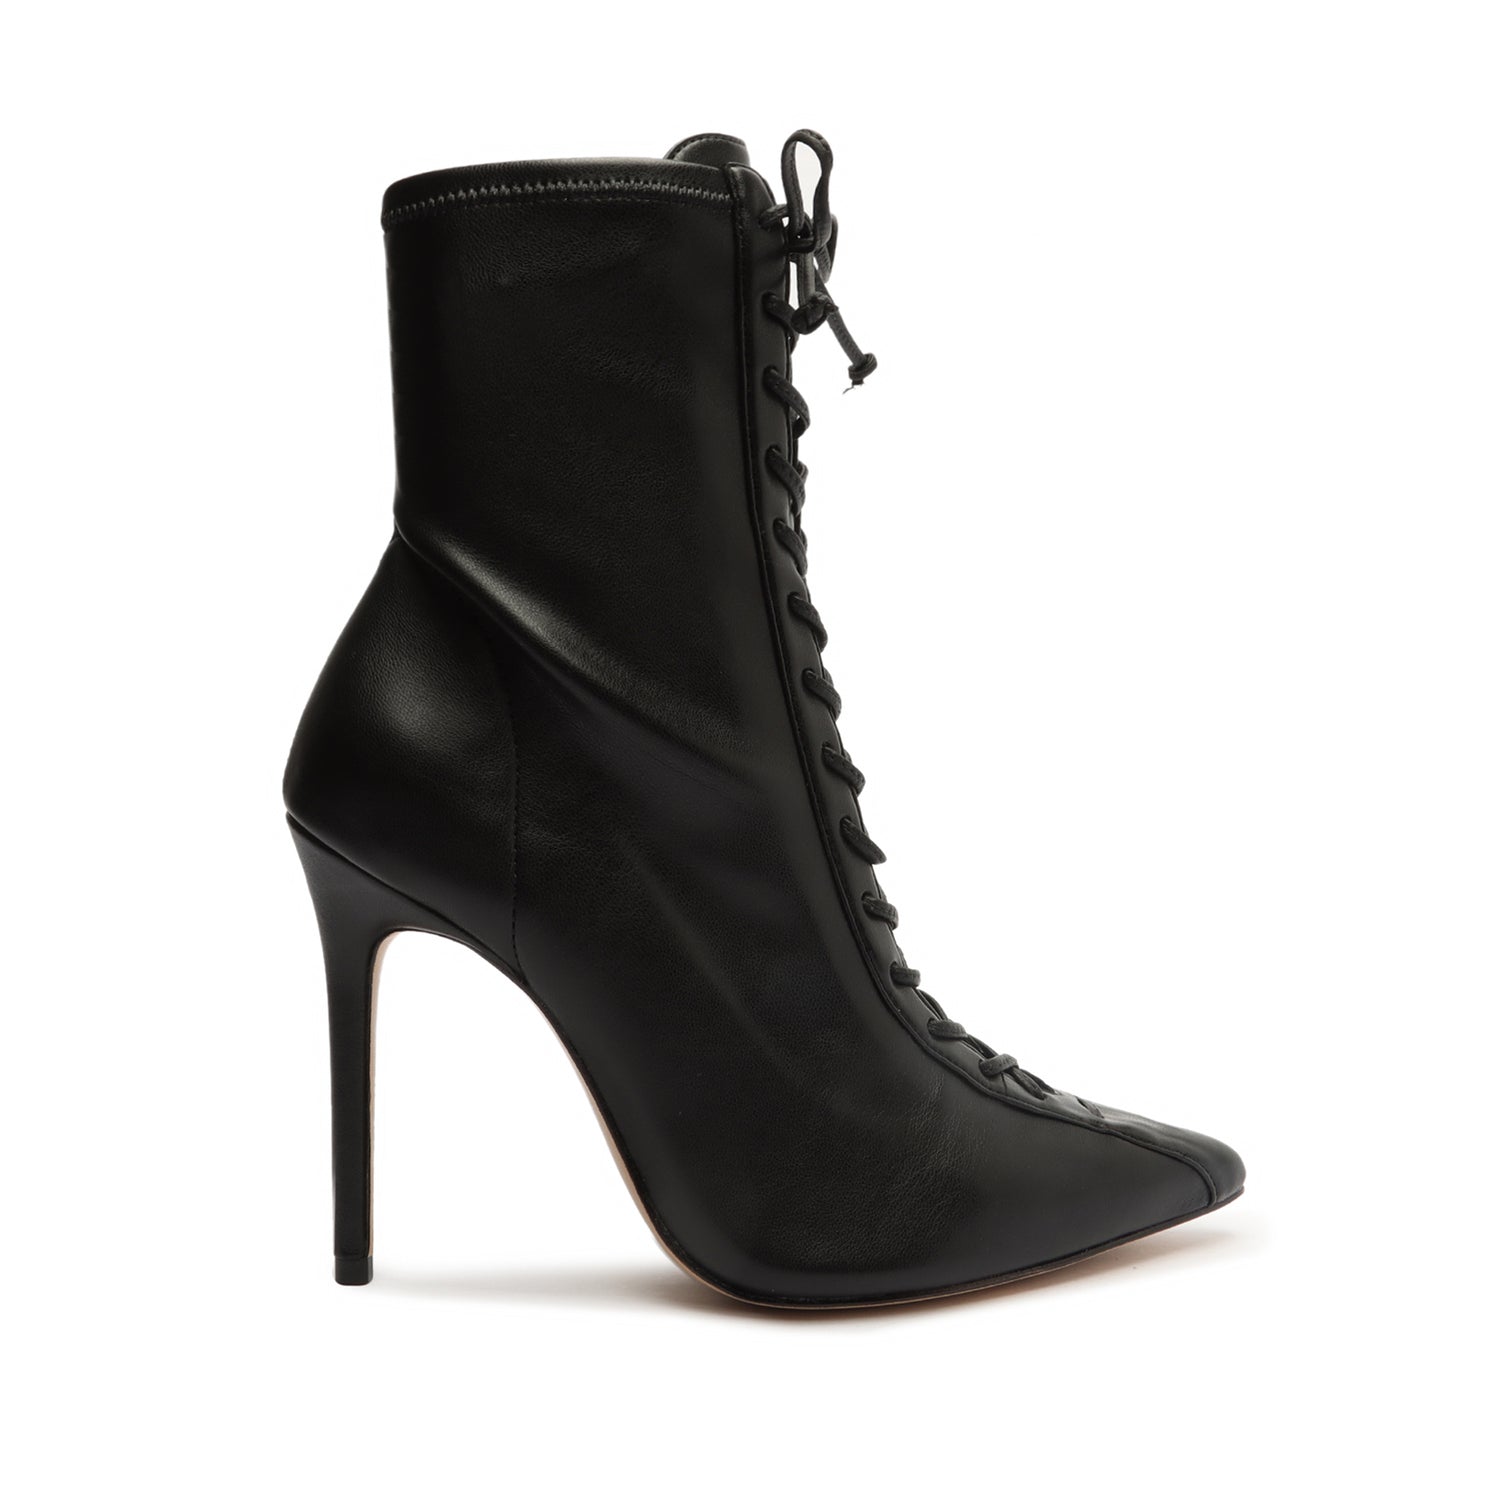 Tennie Bootie Booties OLD - ESSENTIAL 5 Black Stretch Synthetic - Schutz Shoes